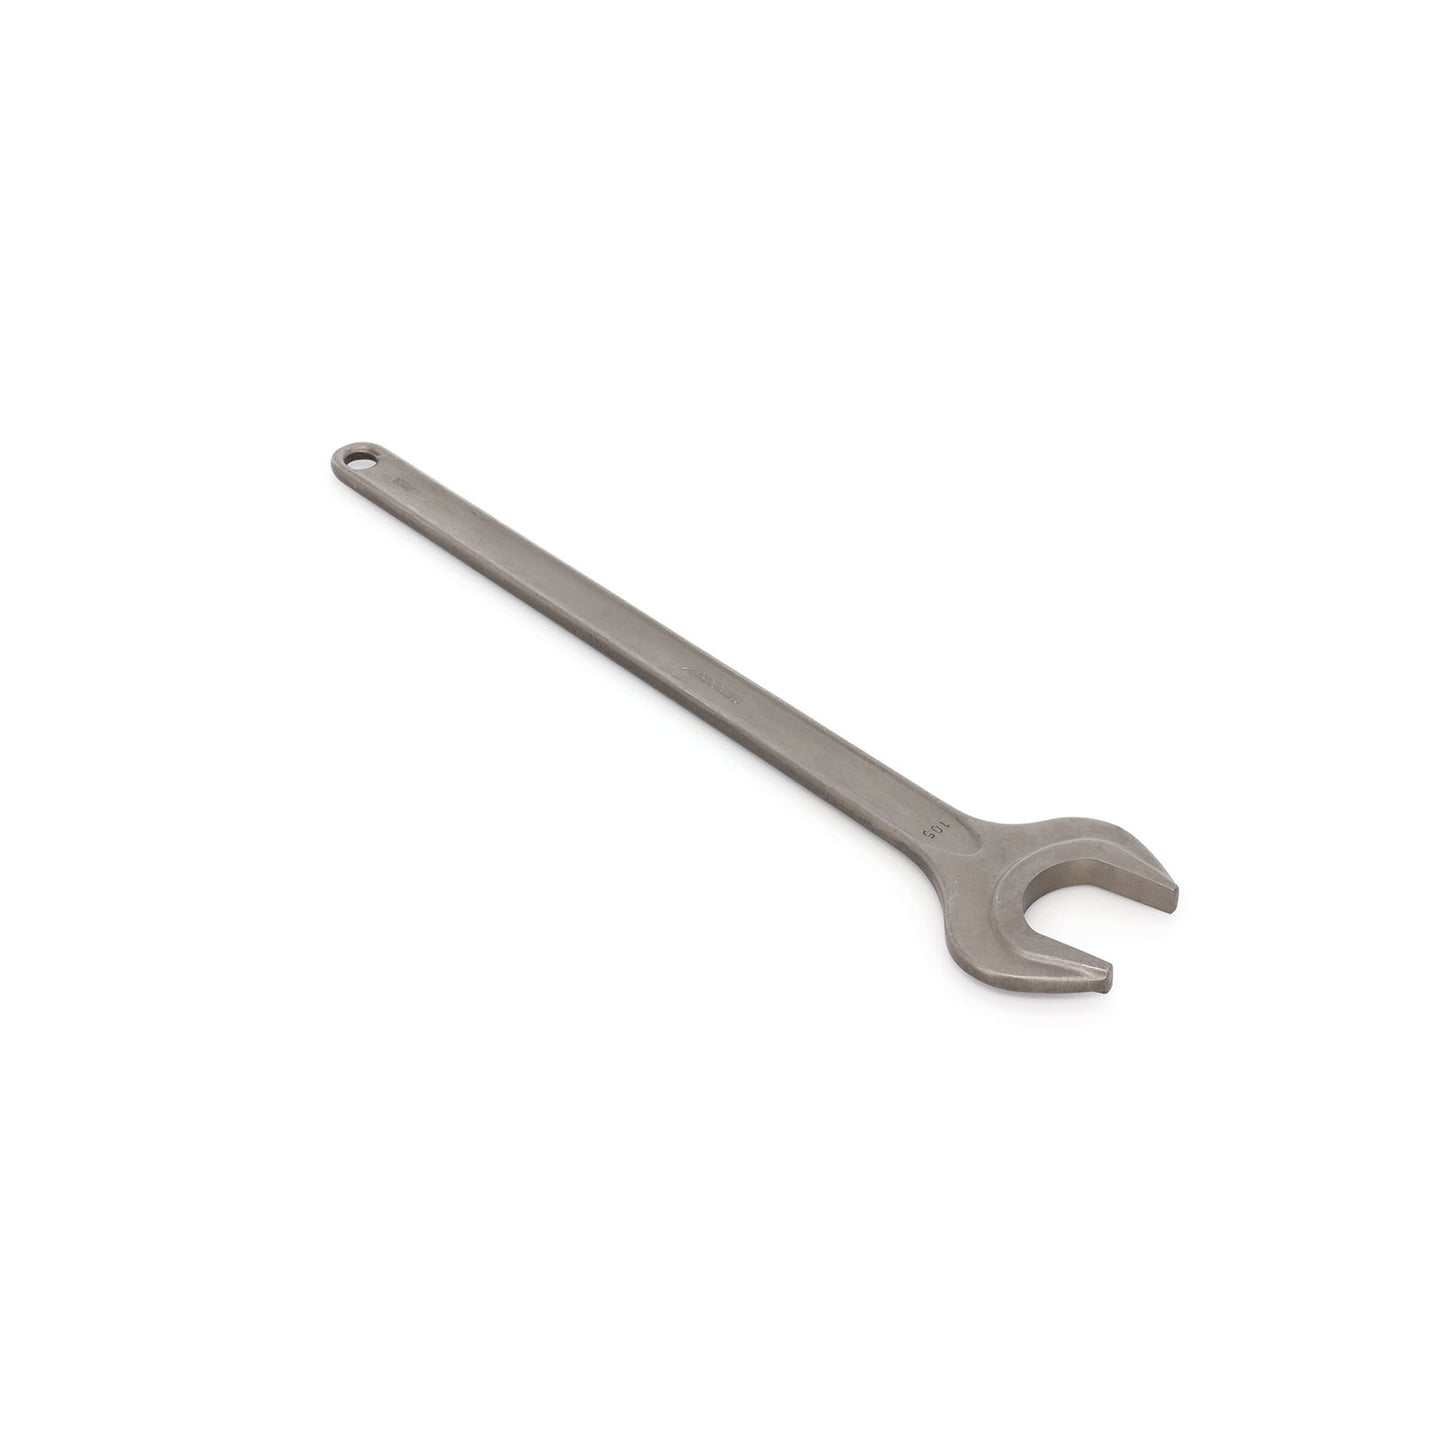 GEDORE 894 105 - 1 Open End Wrench, 105mm (6578320)